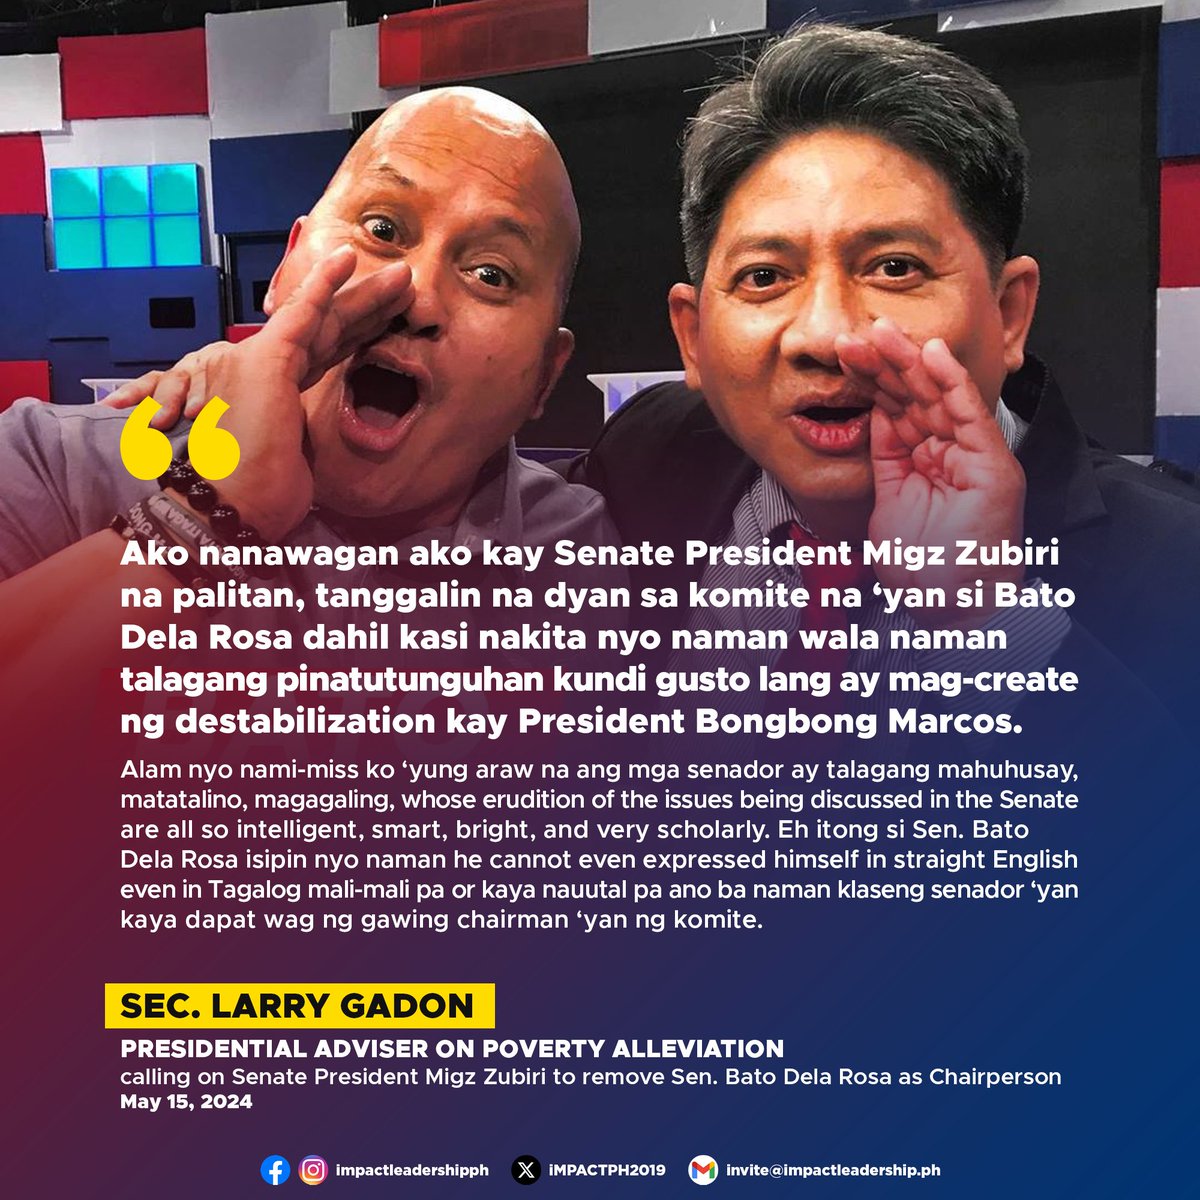 'DAPAT WAG NG GAWING CHAIRMAN 'YAN NG KOMITE' Presidential Adviser on Poverty Alleviation Larry Gadon calls on Senate President Migz to remove Sen. Ronald Dela Rosa as Chairperson of the Senate Committee on Public Order over his handling of the investigation on the 'PDEA leaks'.